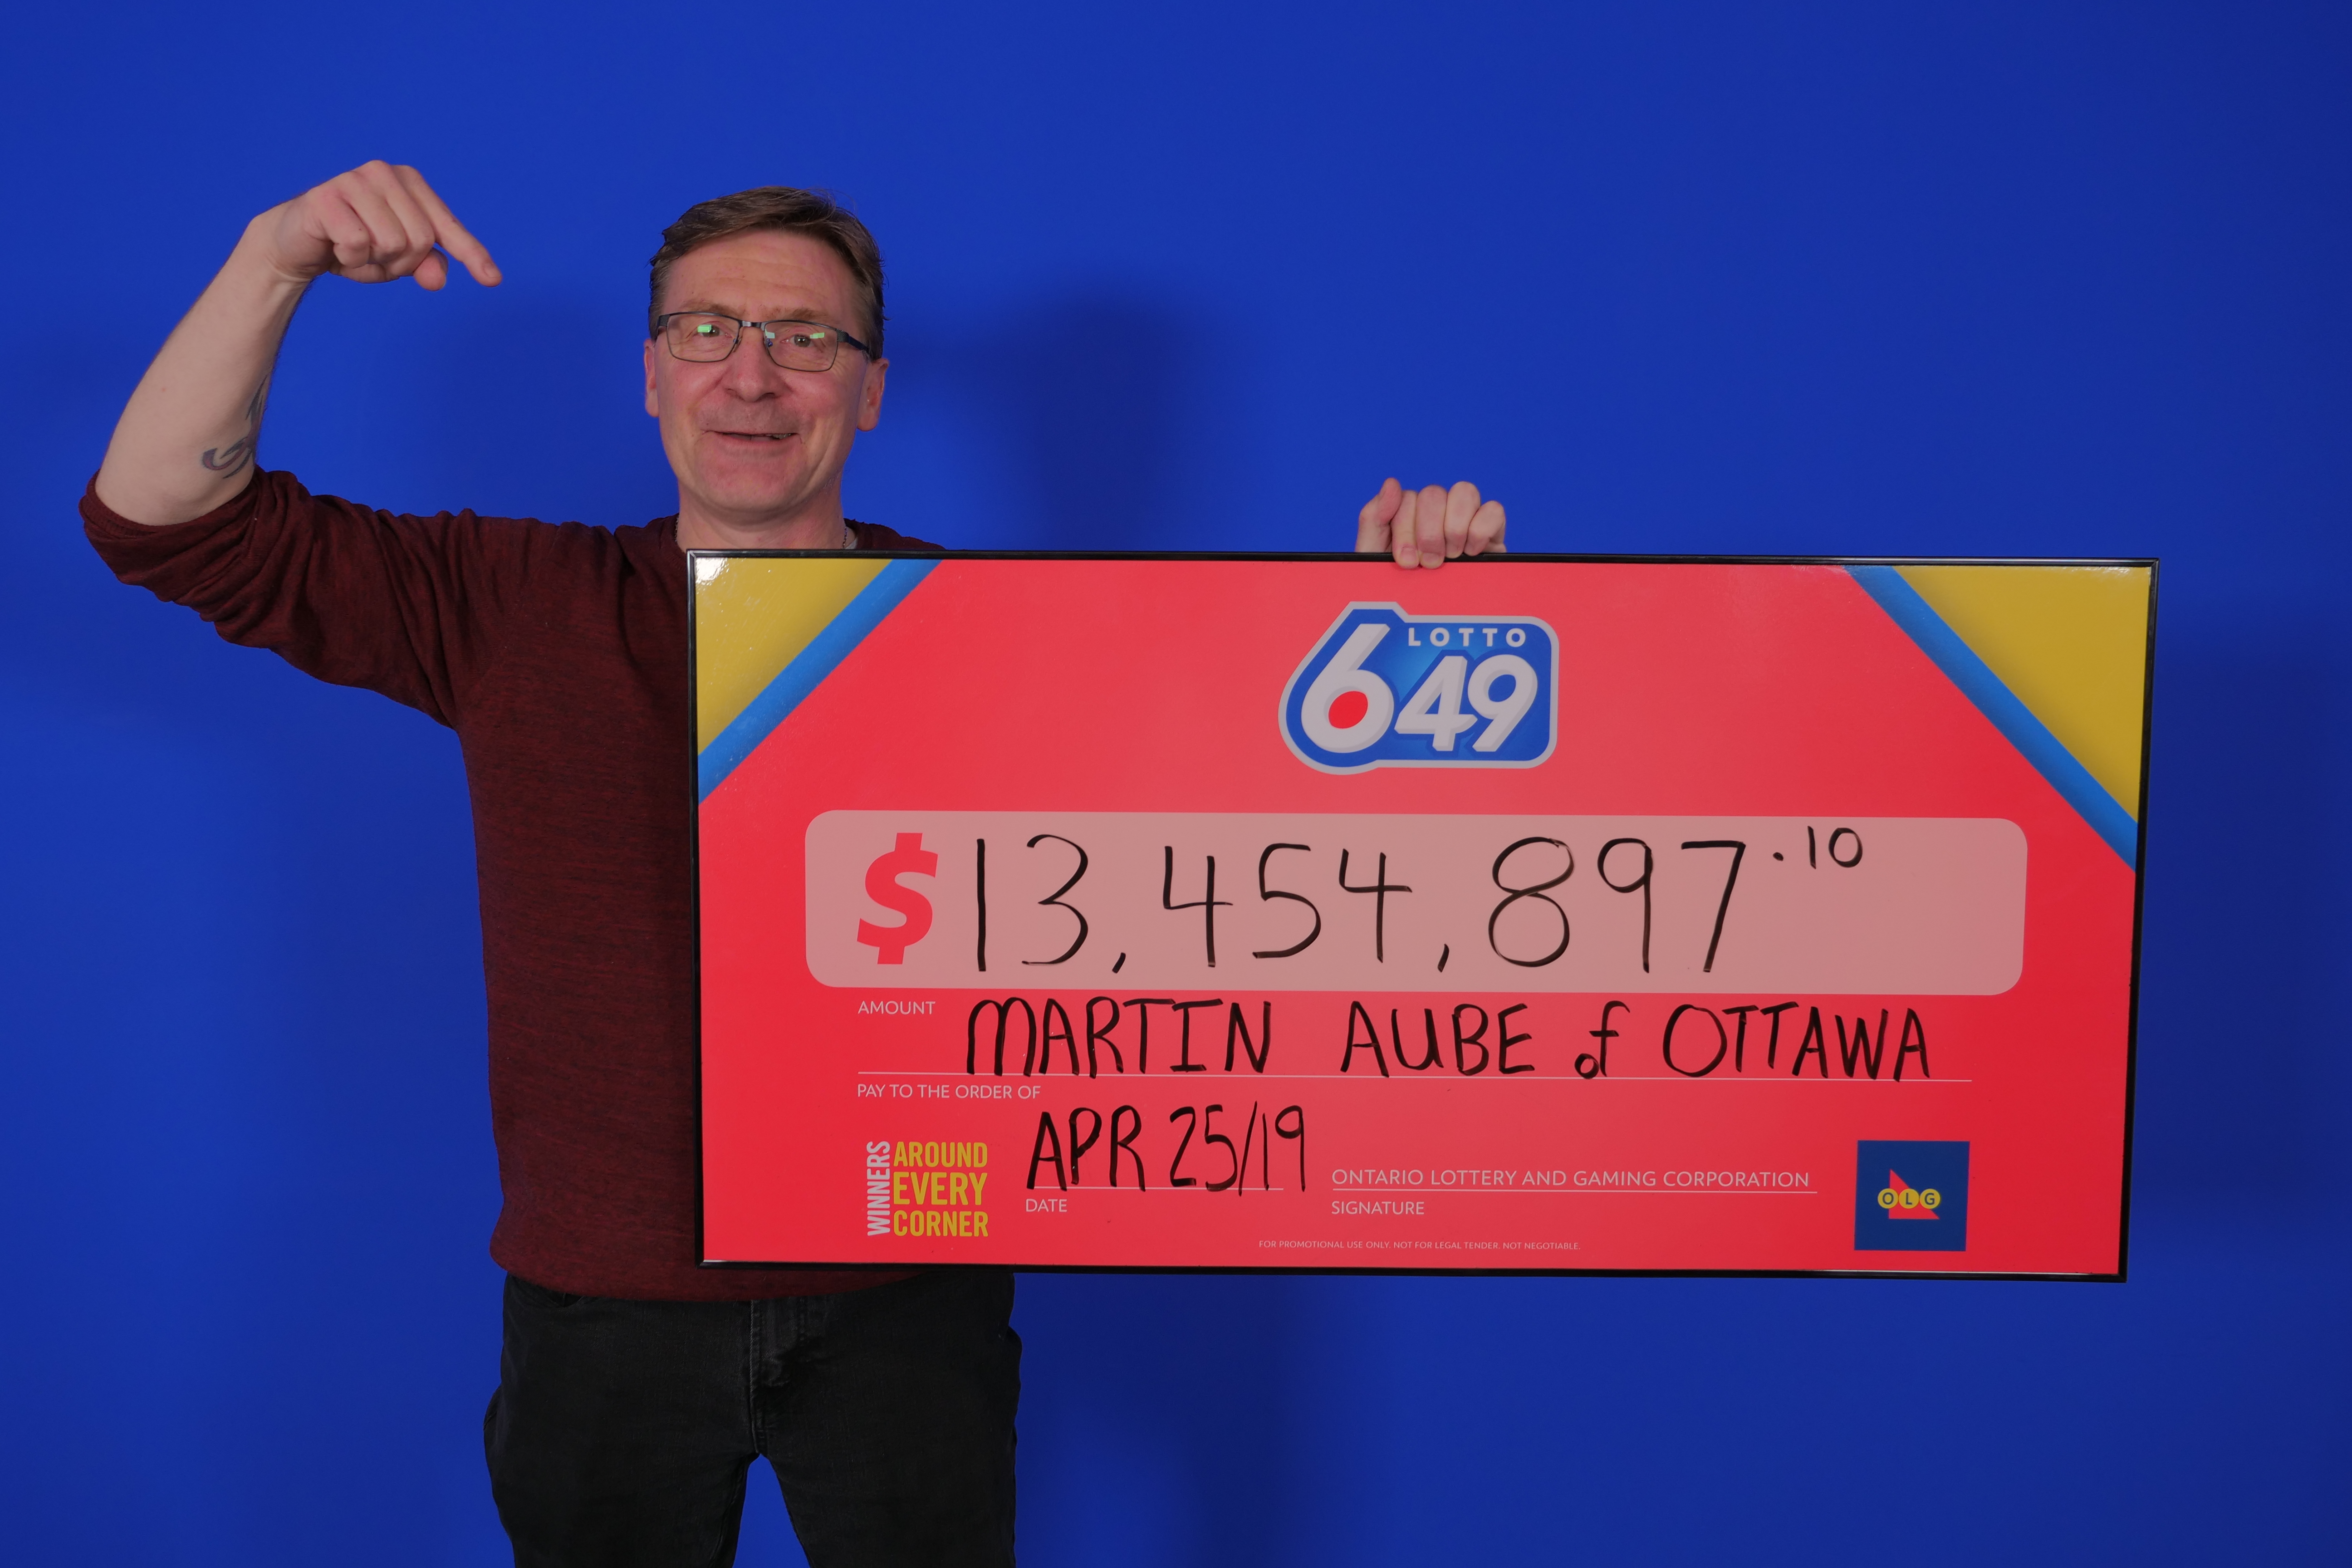 lotto 649 winning numbers for april 20 2019